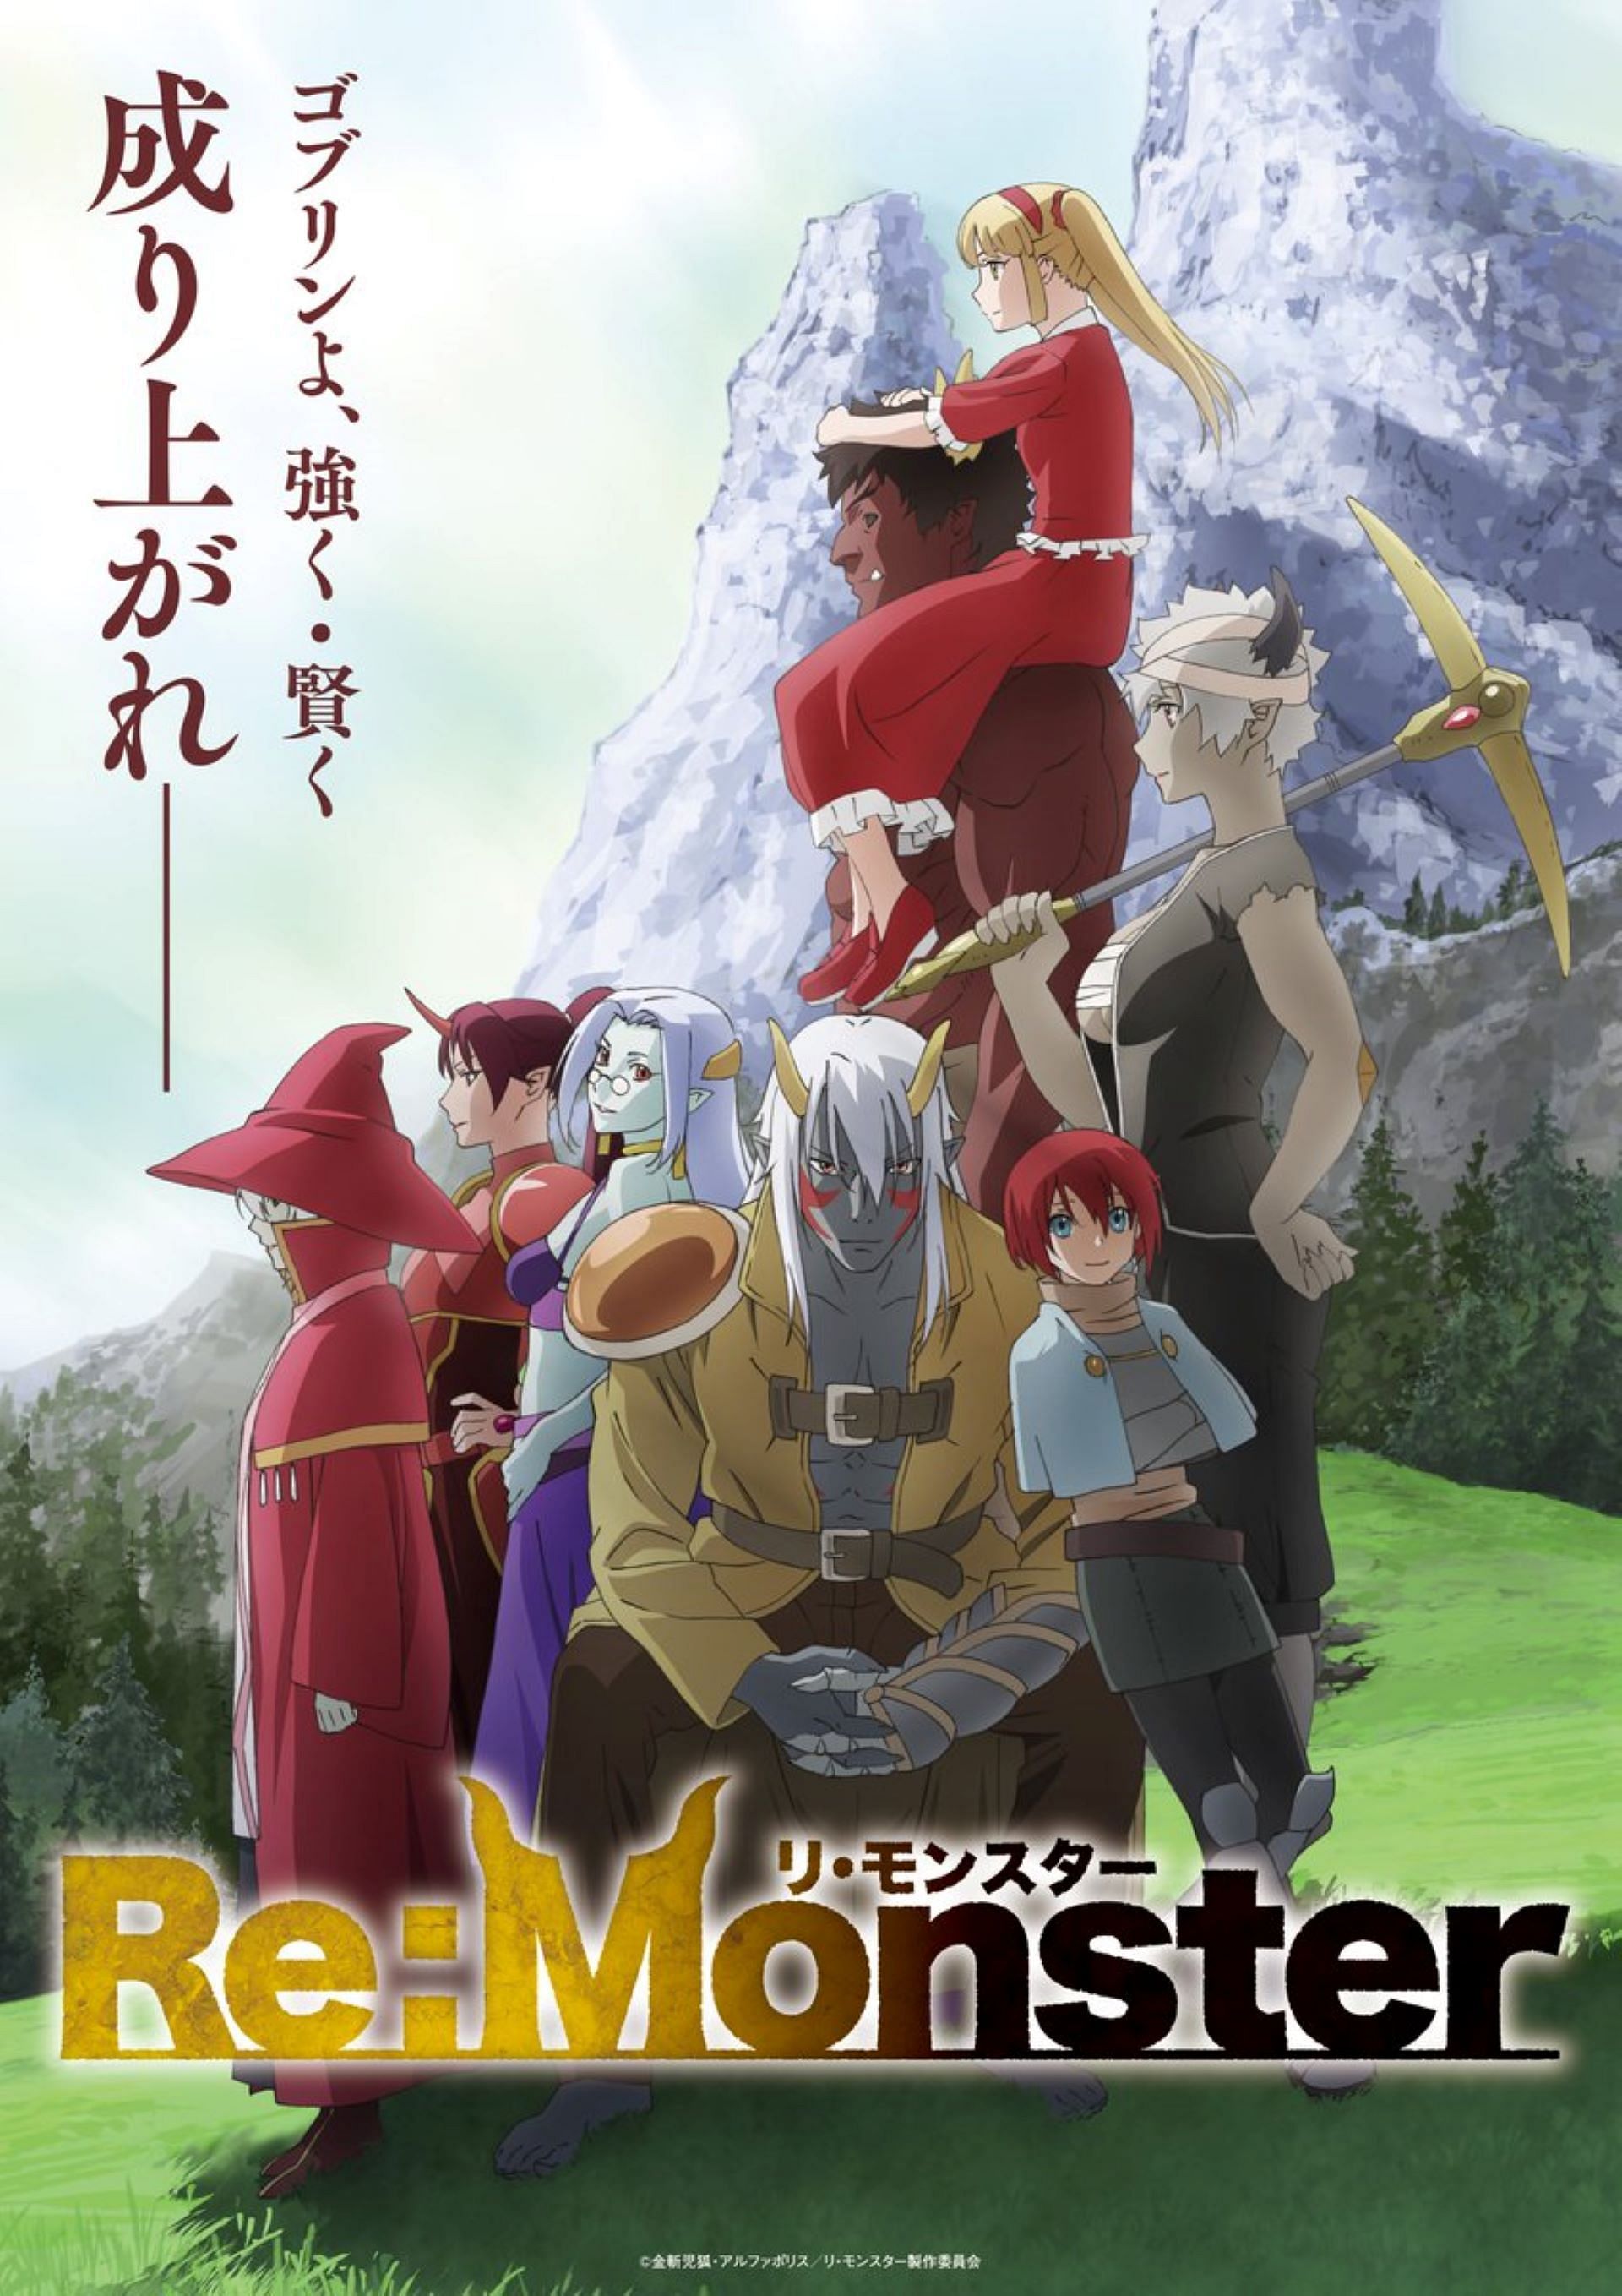 ReMonster anime unveils release date, new visual and additional cast